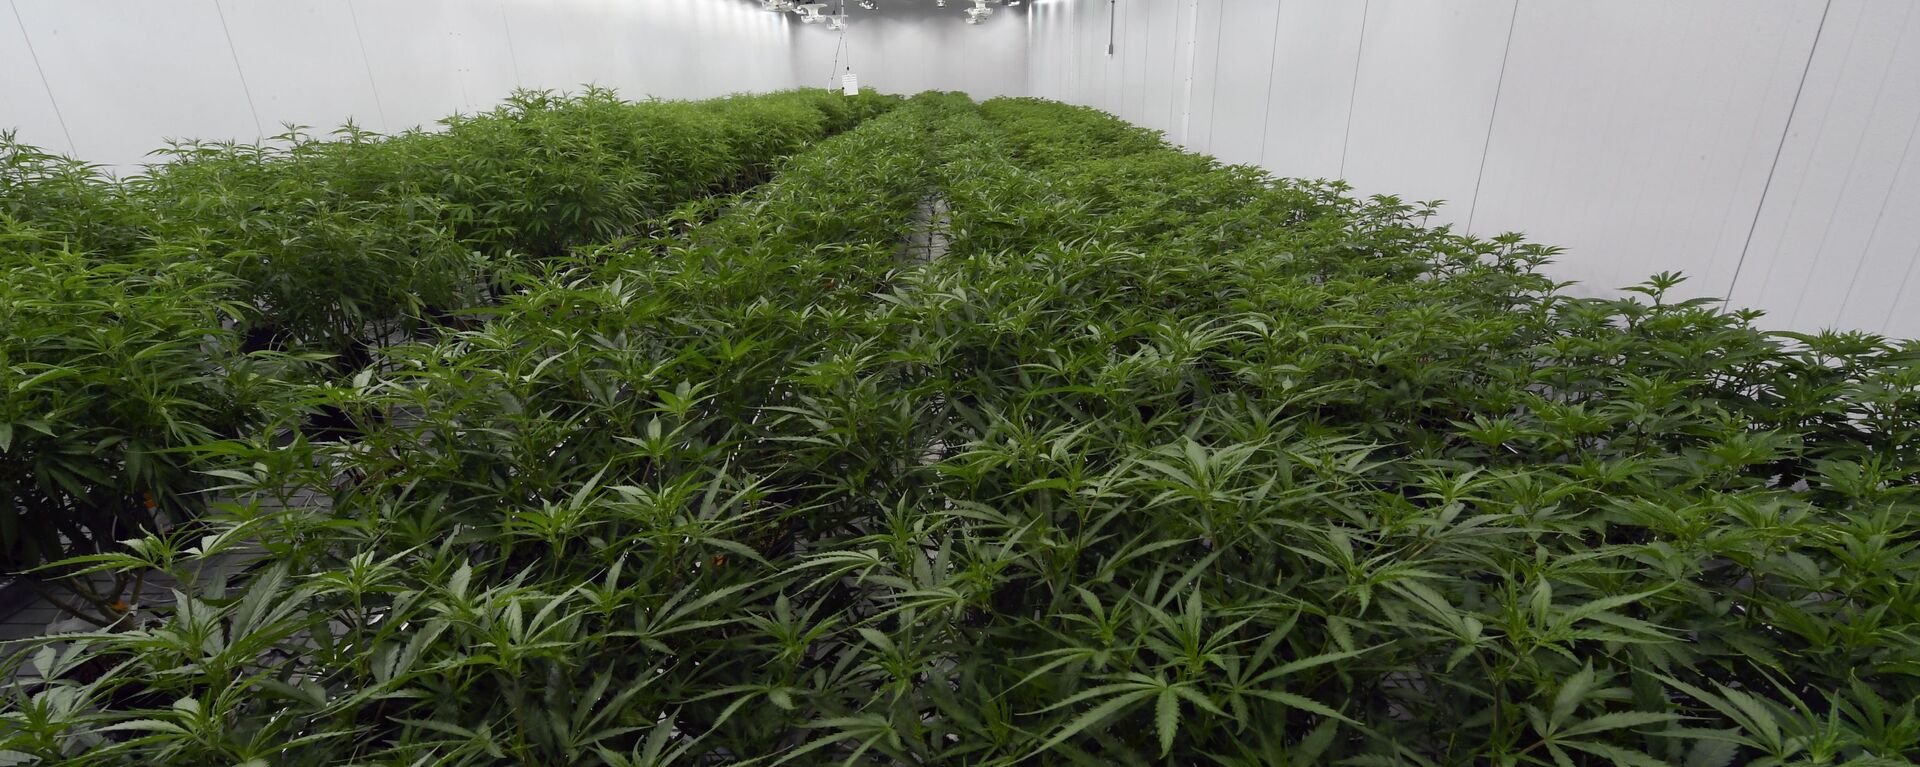 This Aug. 22, 2019 photo shows medical marijuana plants being grown before flowering during a media tour of the Curaleaf medical cannabis cultivation and processing facility in Ravena, N.Y. - Sputnik International, 1920, 05.12.2020